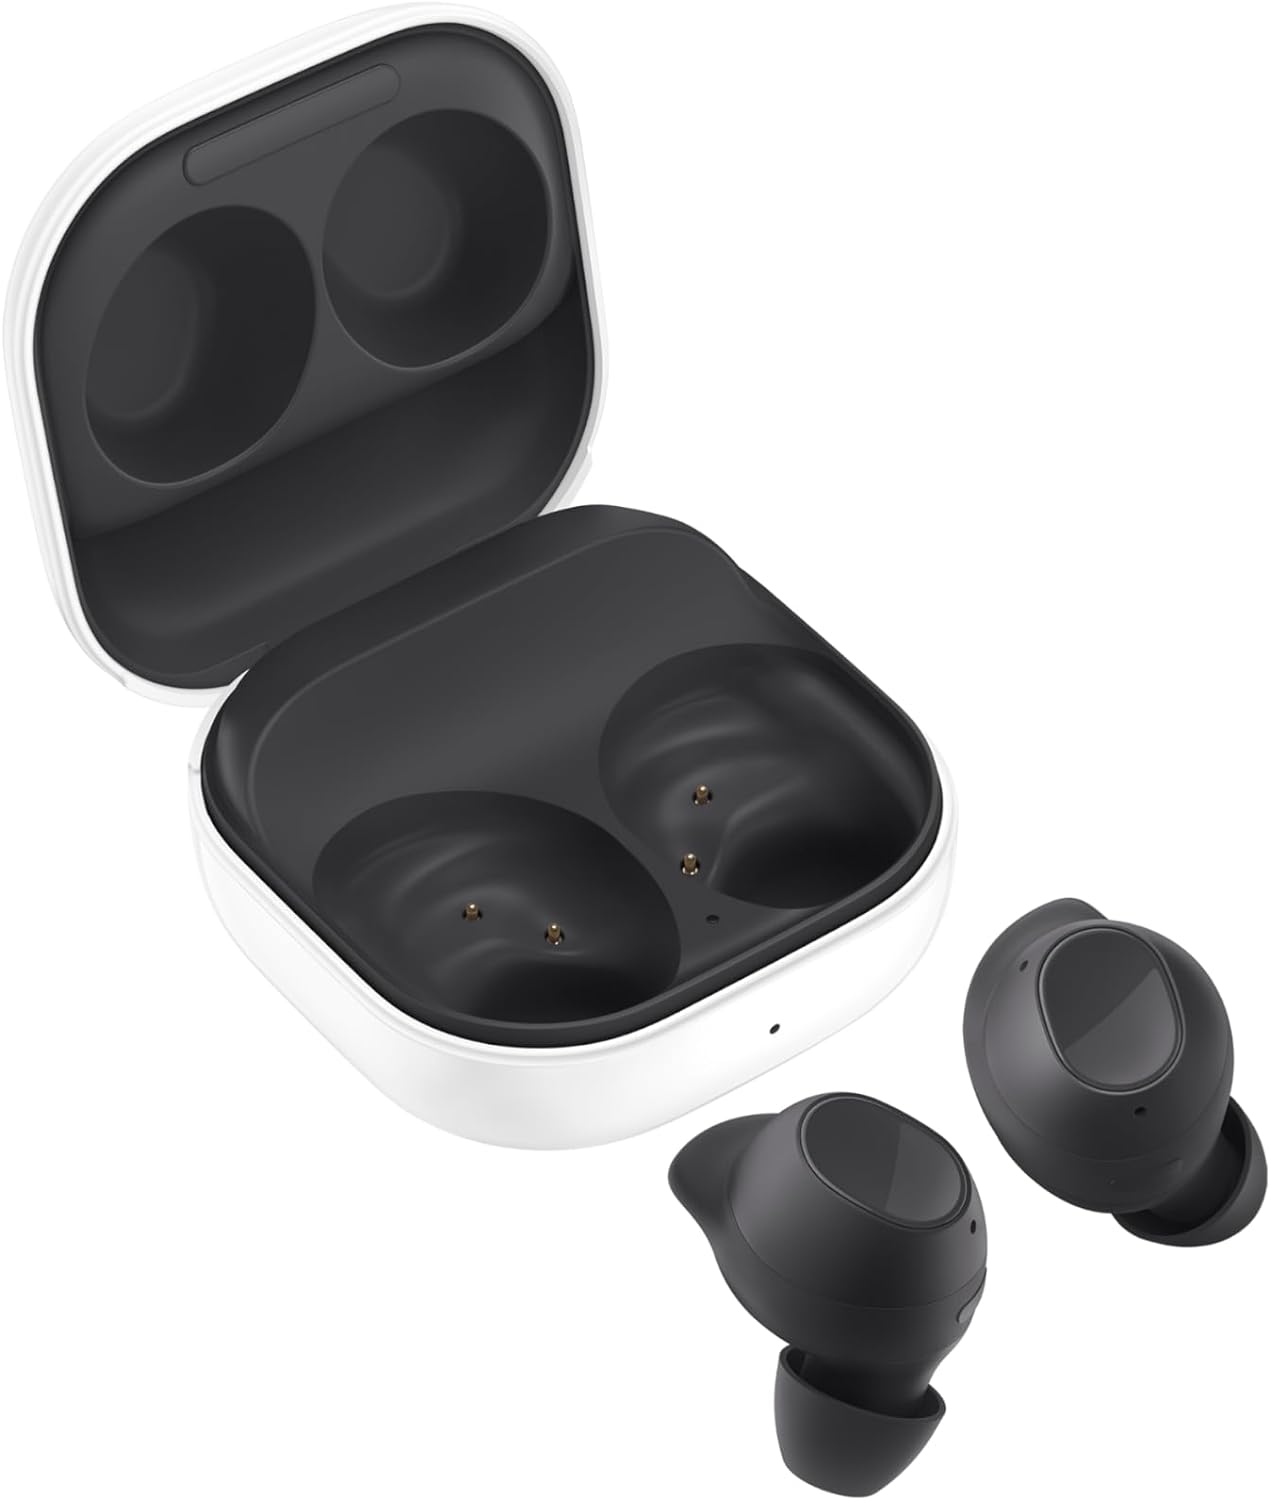 Samsung Galaxy Buds FE - Seamlessly sync with Samsung Galaxy devices for easy connectivity. 8806095252780